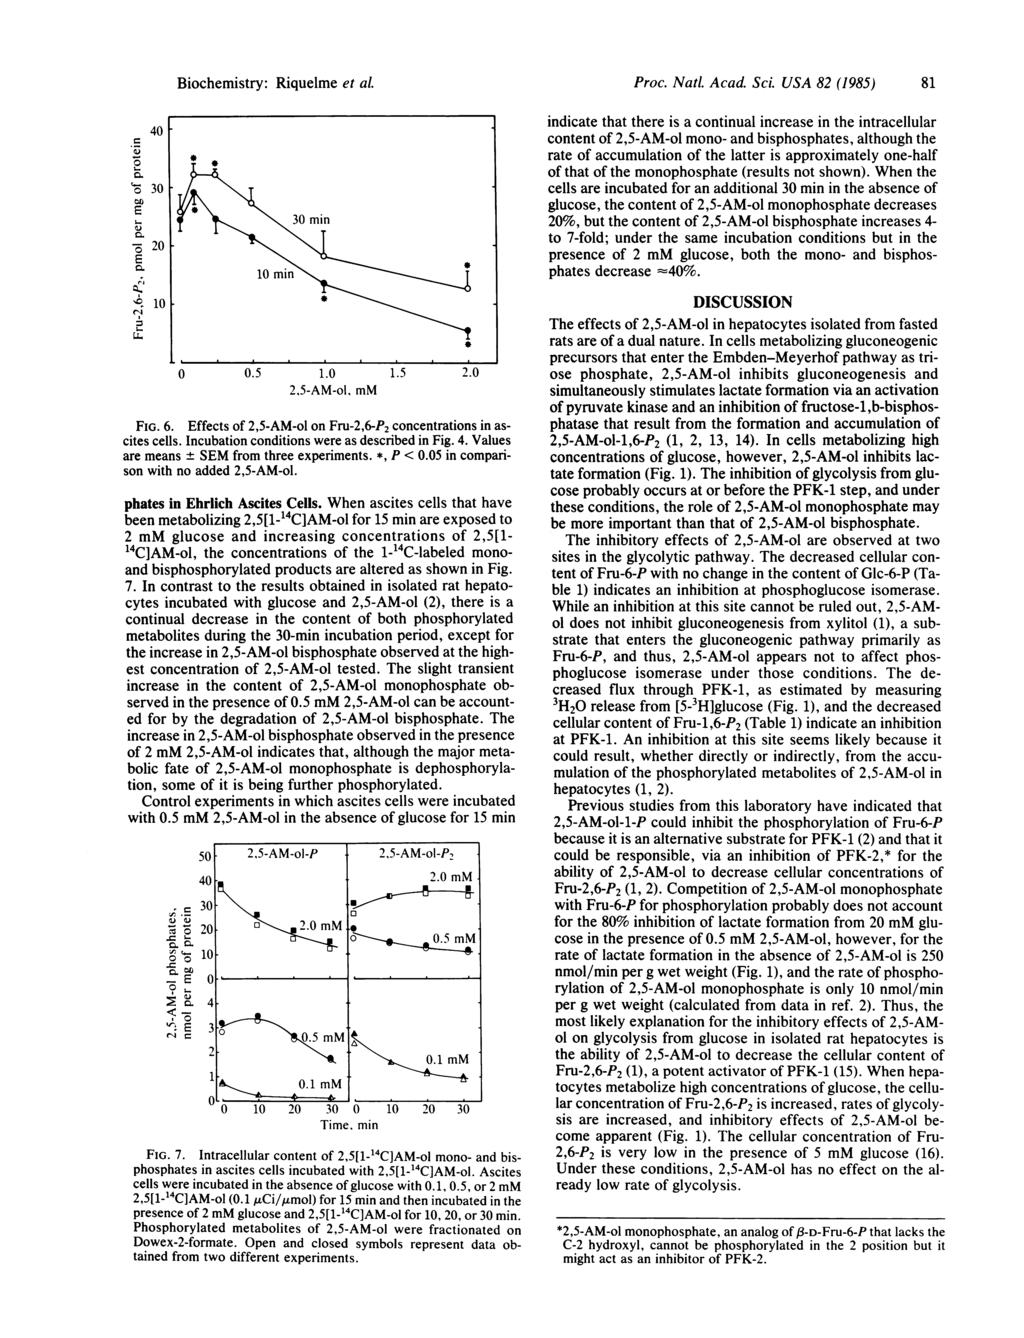 4 ' 3 E.,6 1 Biochemistry: Riquelme et al s1 2 1~~~~ min \.5 1. 1.5 2. FIG. 6. Effects of 2,5-AM-ol on Fru-2,6-P2 concentrations in ascites cells. Incubation conditions were as described in Fig. 4.